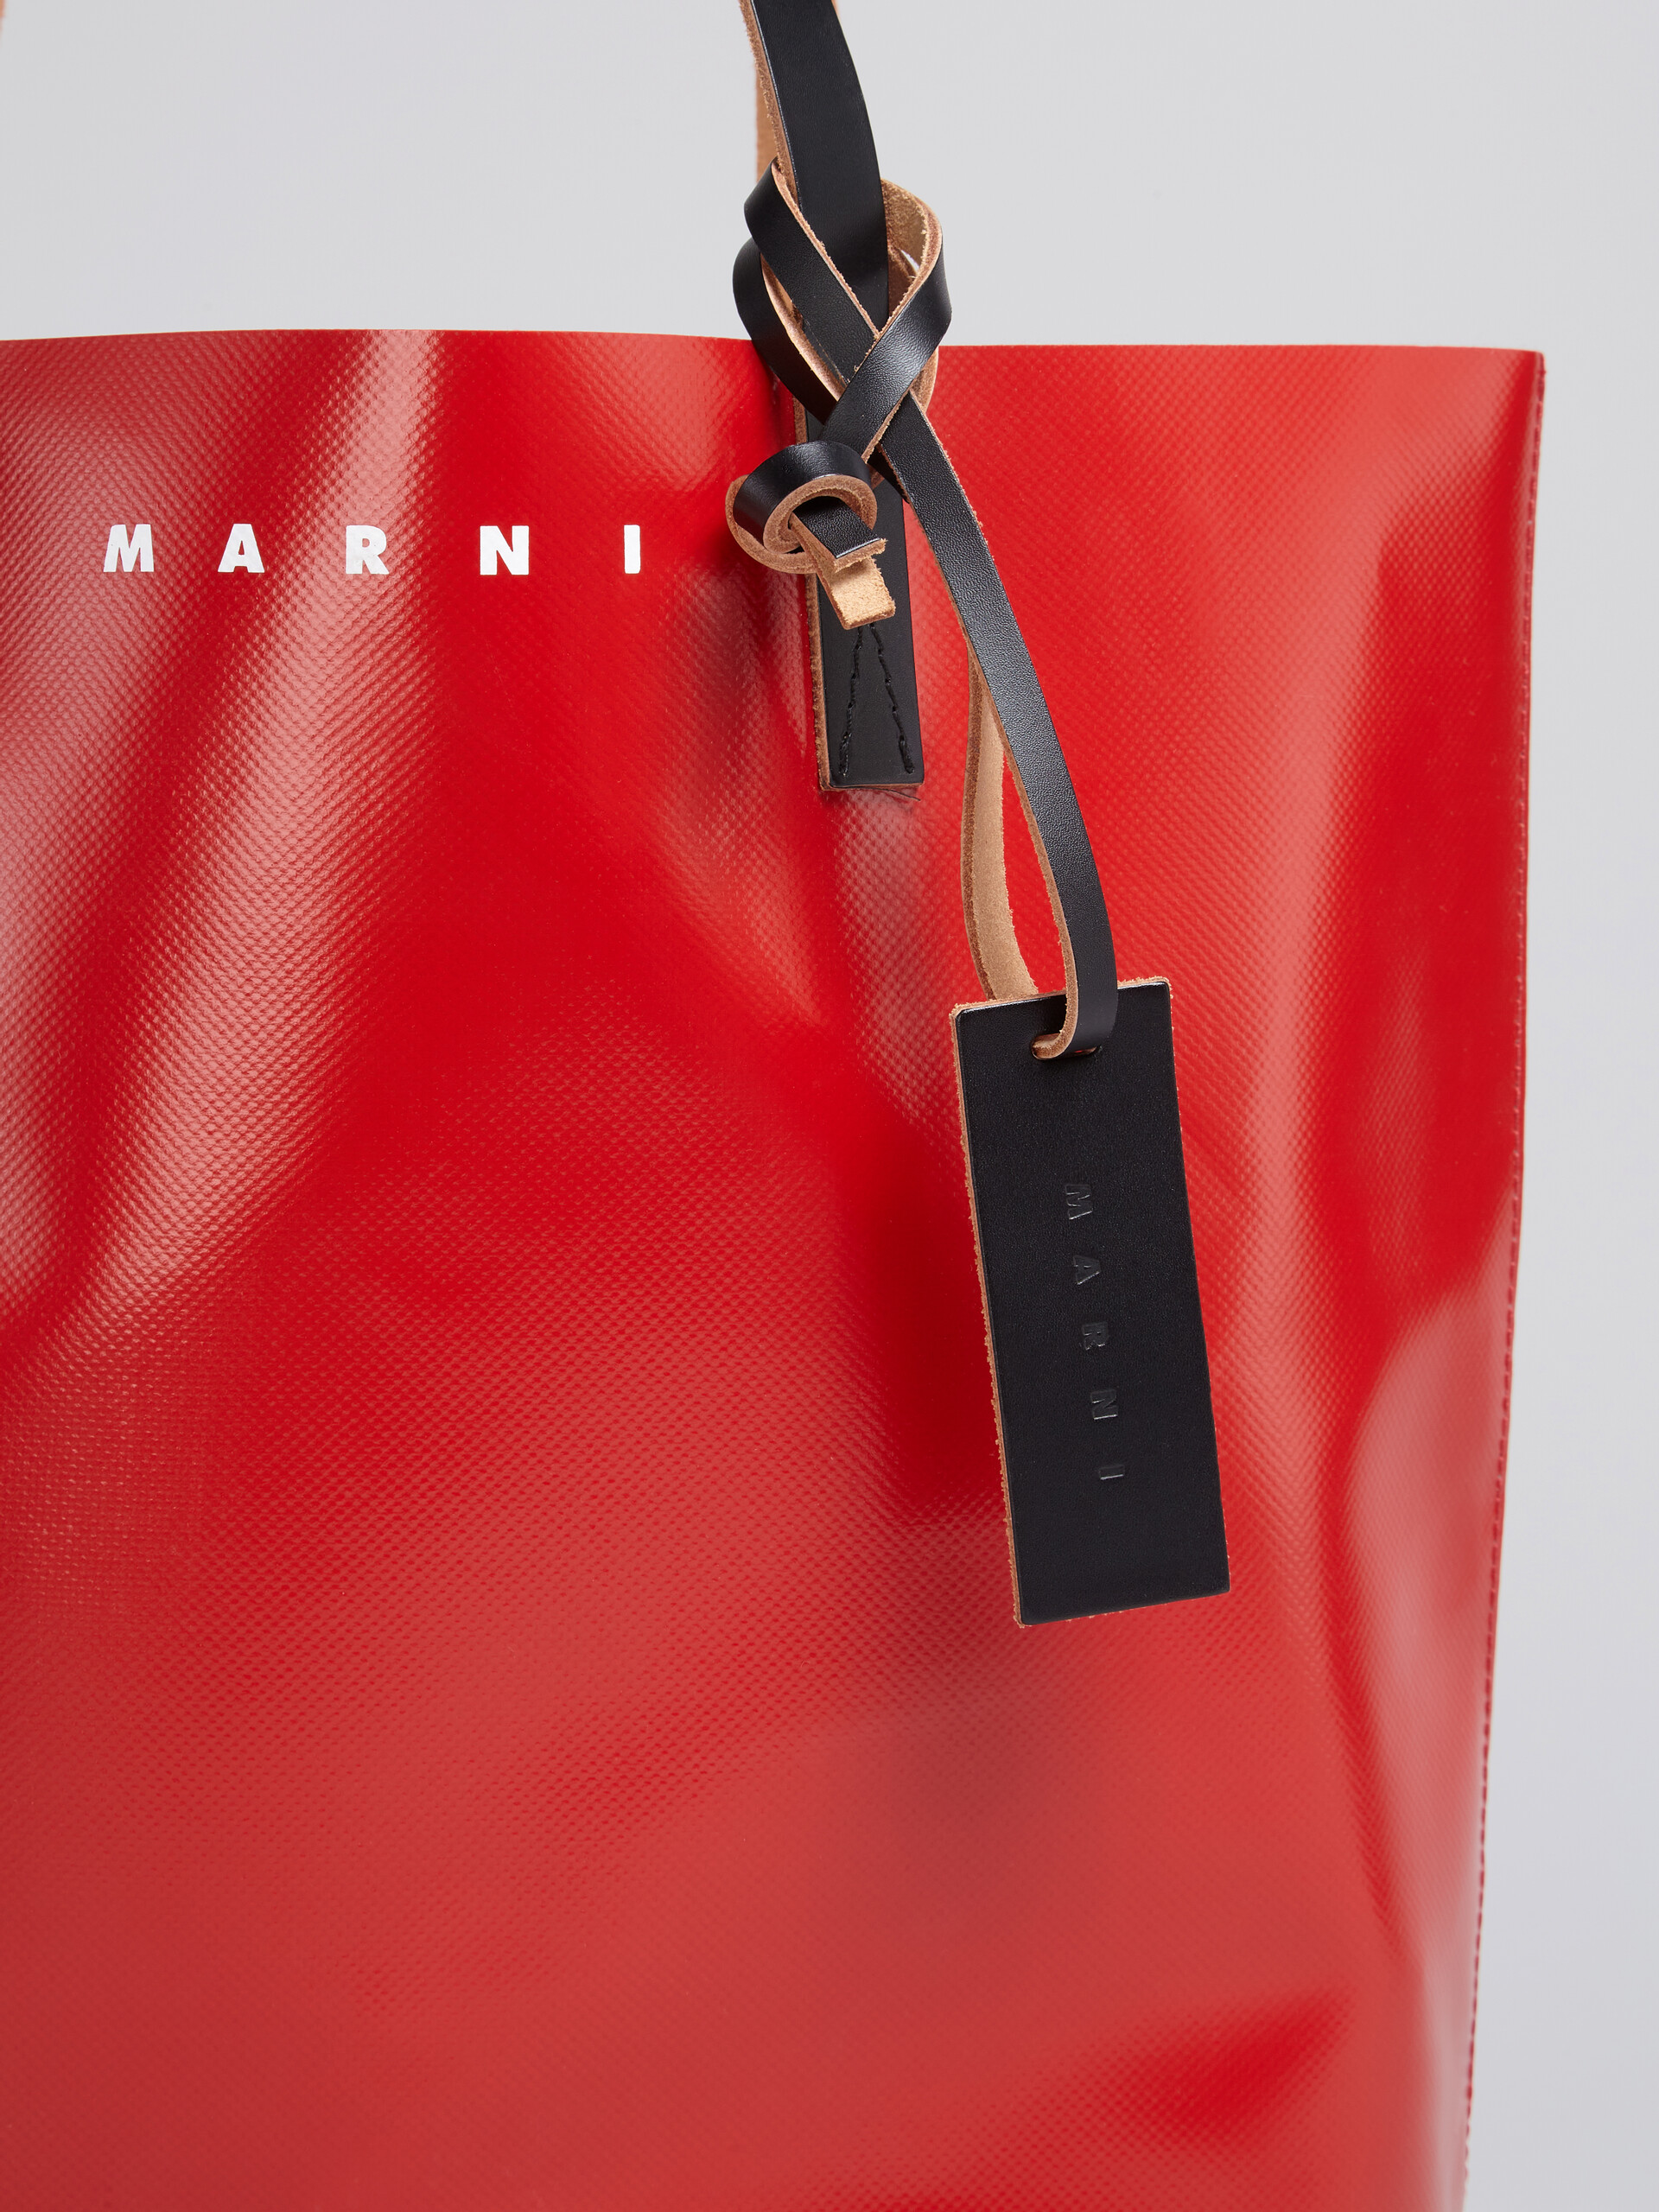 Red and grey PVC shopping bag with calf leather handles - Shopping Bags - Image 4